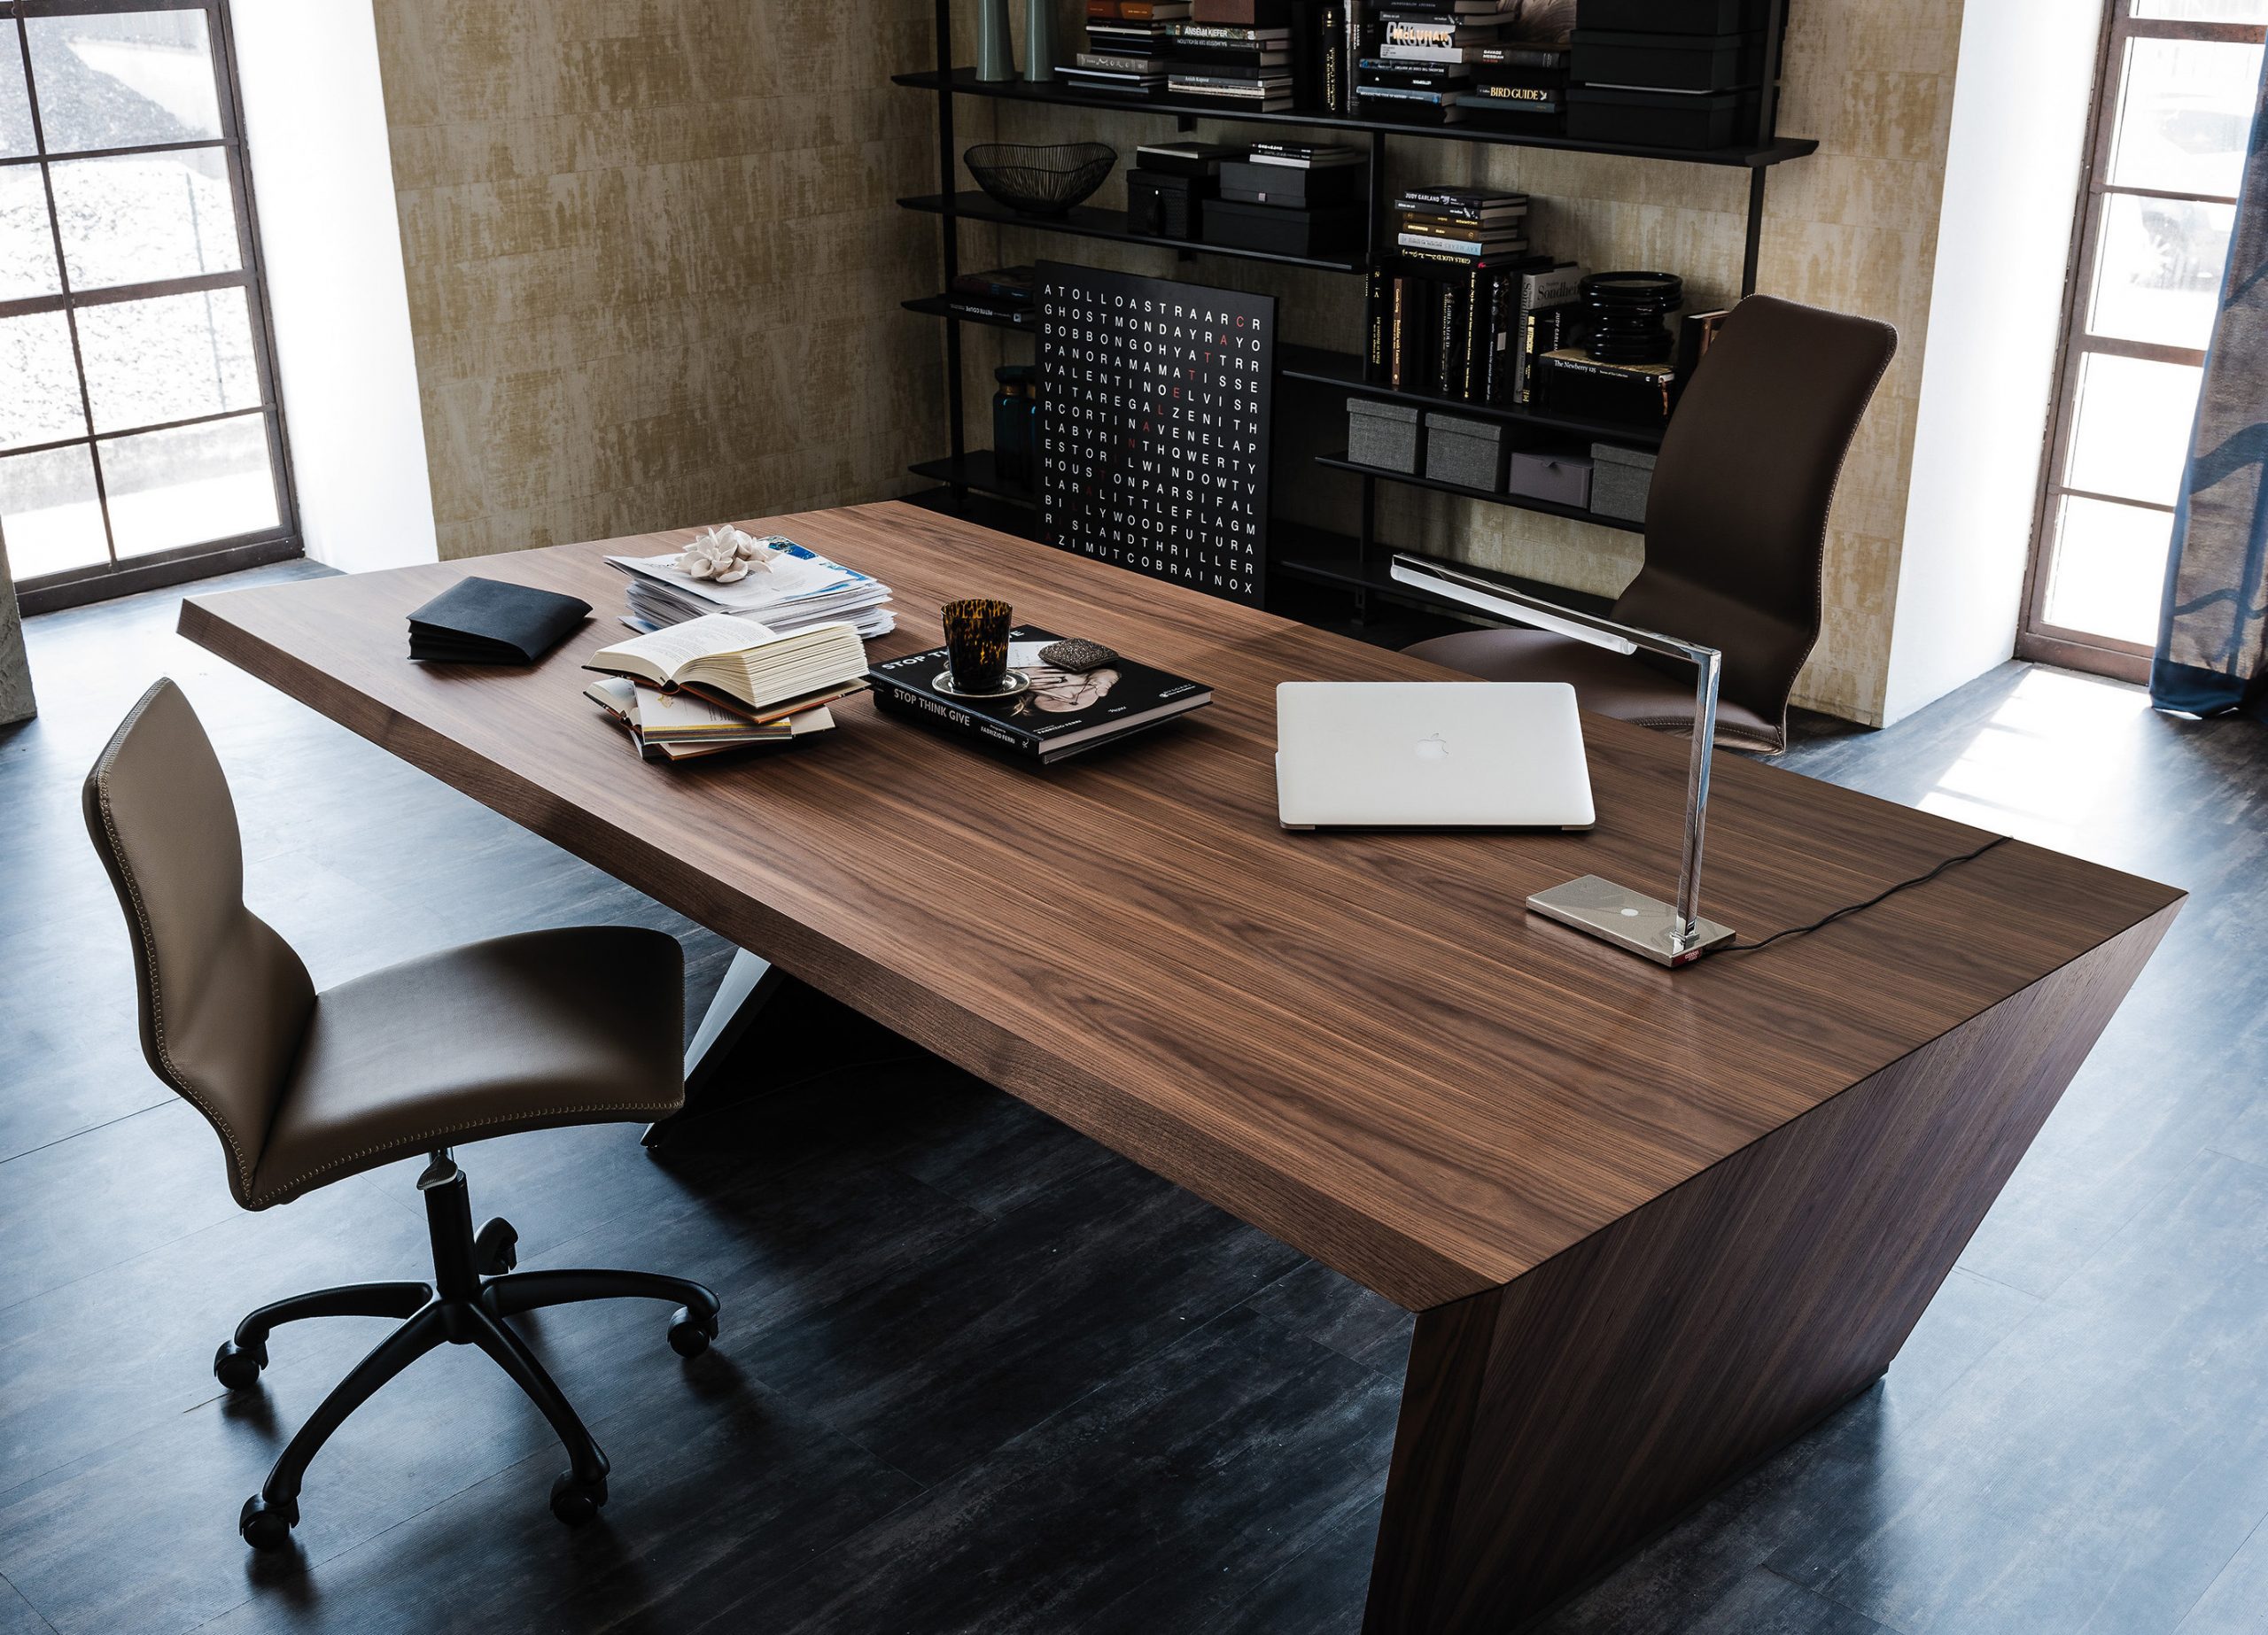 Helpful Tips for Creating a Home Office